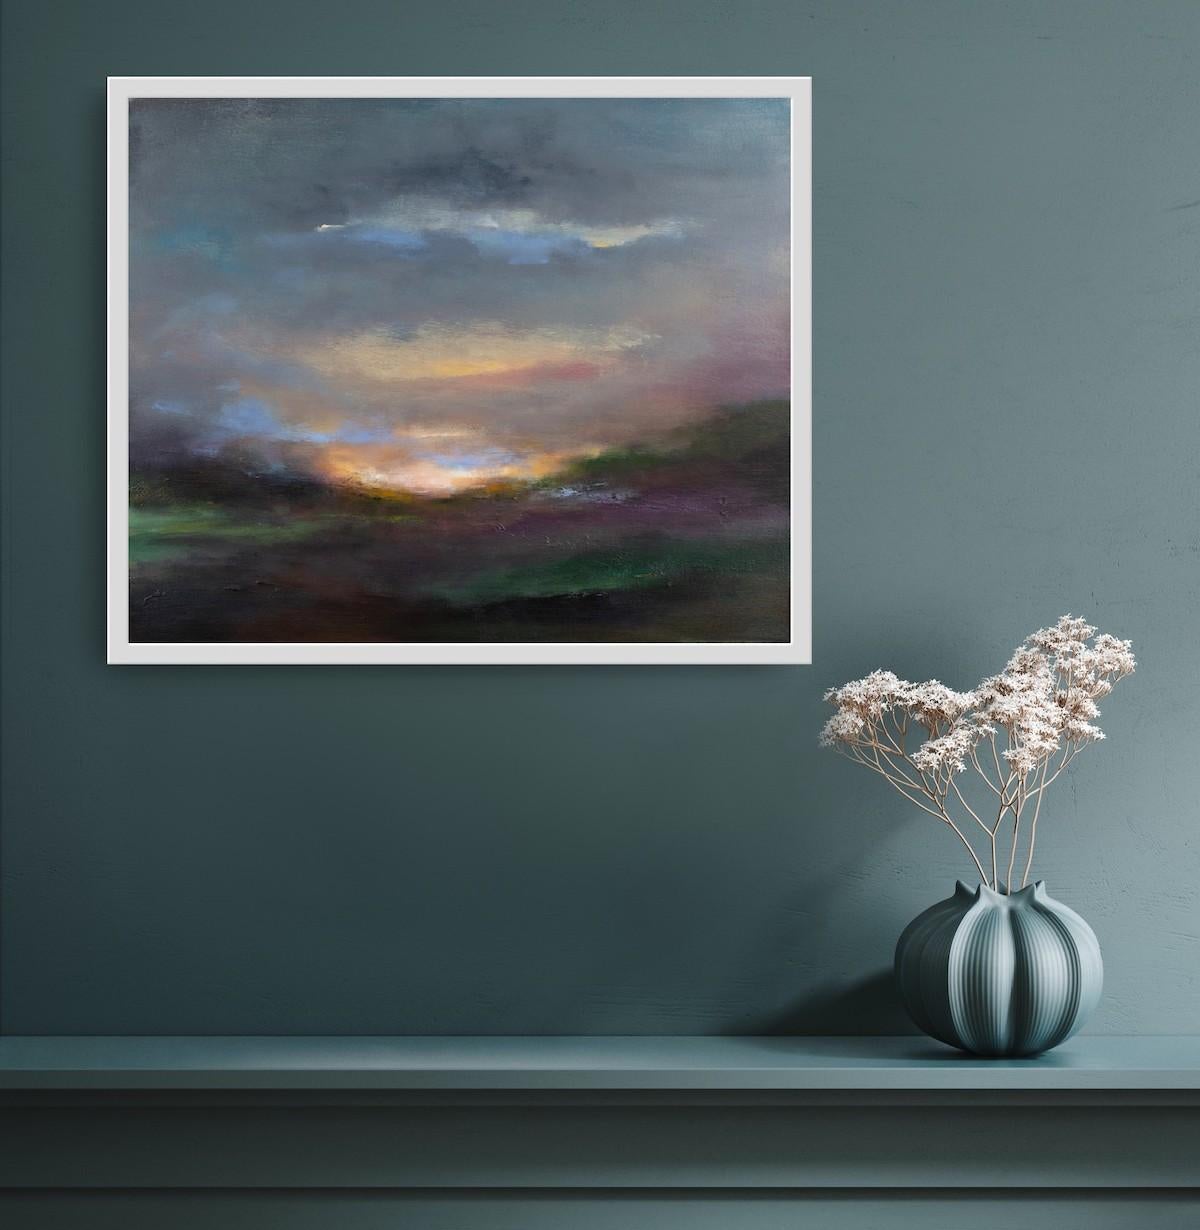 Smouldering Sunset by Mary Burtenshaw [2019]

original
Acrylic on canvas
Image size: H:50 cm x W:61 cm
Complete Size of Unframed Work: H:50 cm x W:61 cm x D:4cm
Sold Unframed
Please note that insitu images are purely an indication of how a piece may